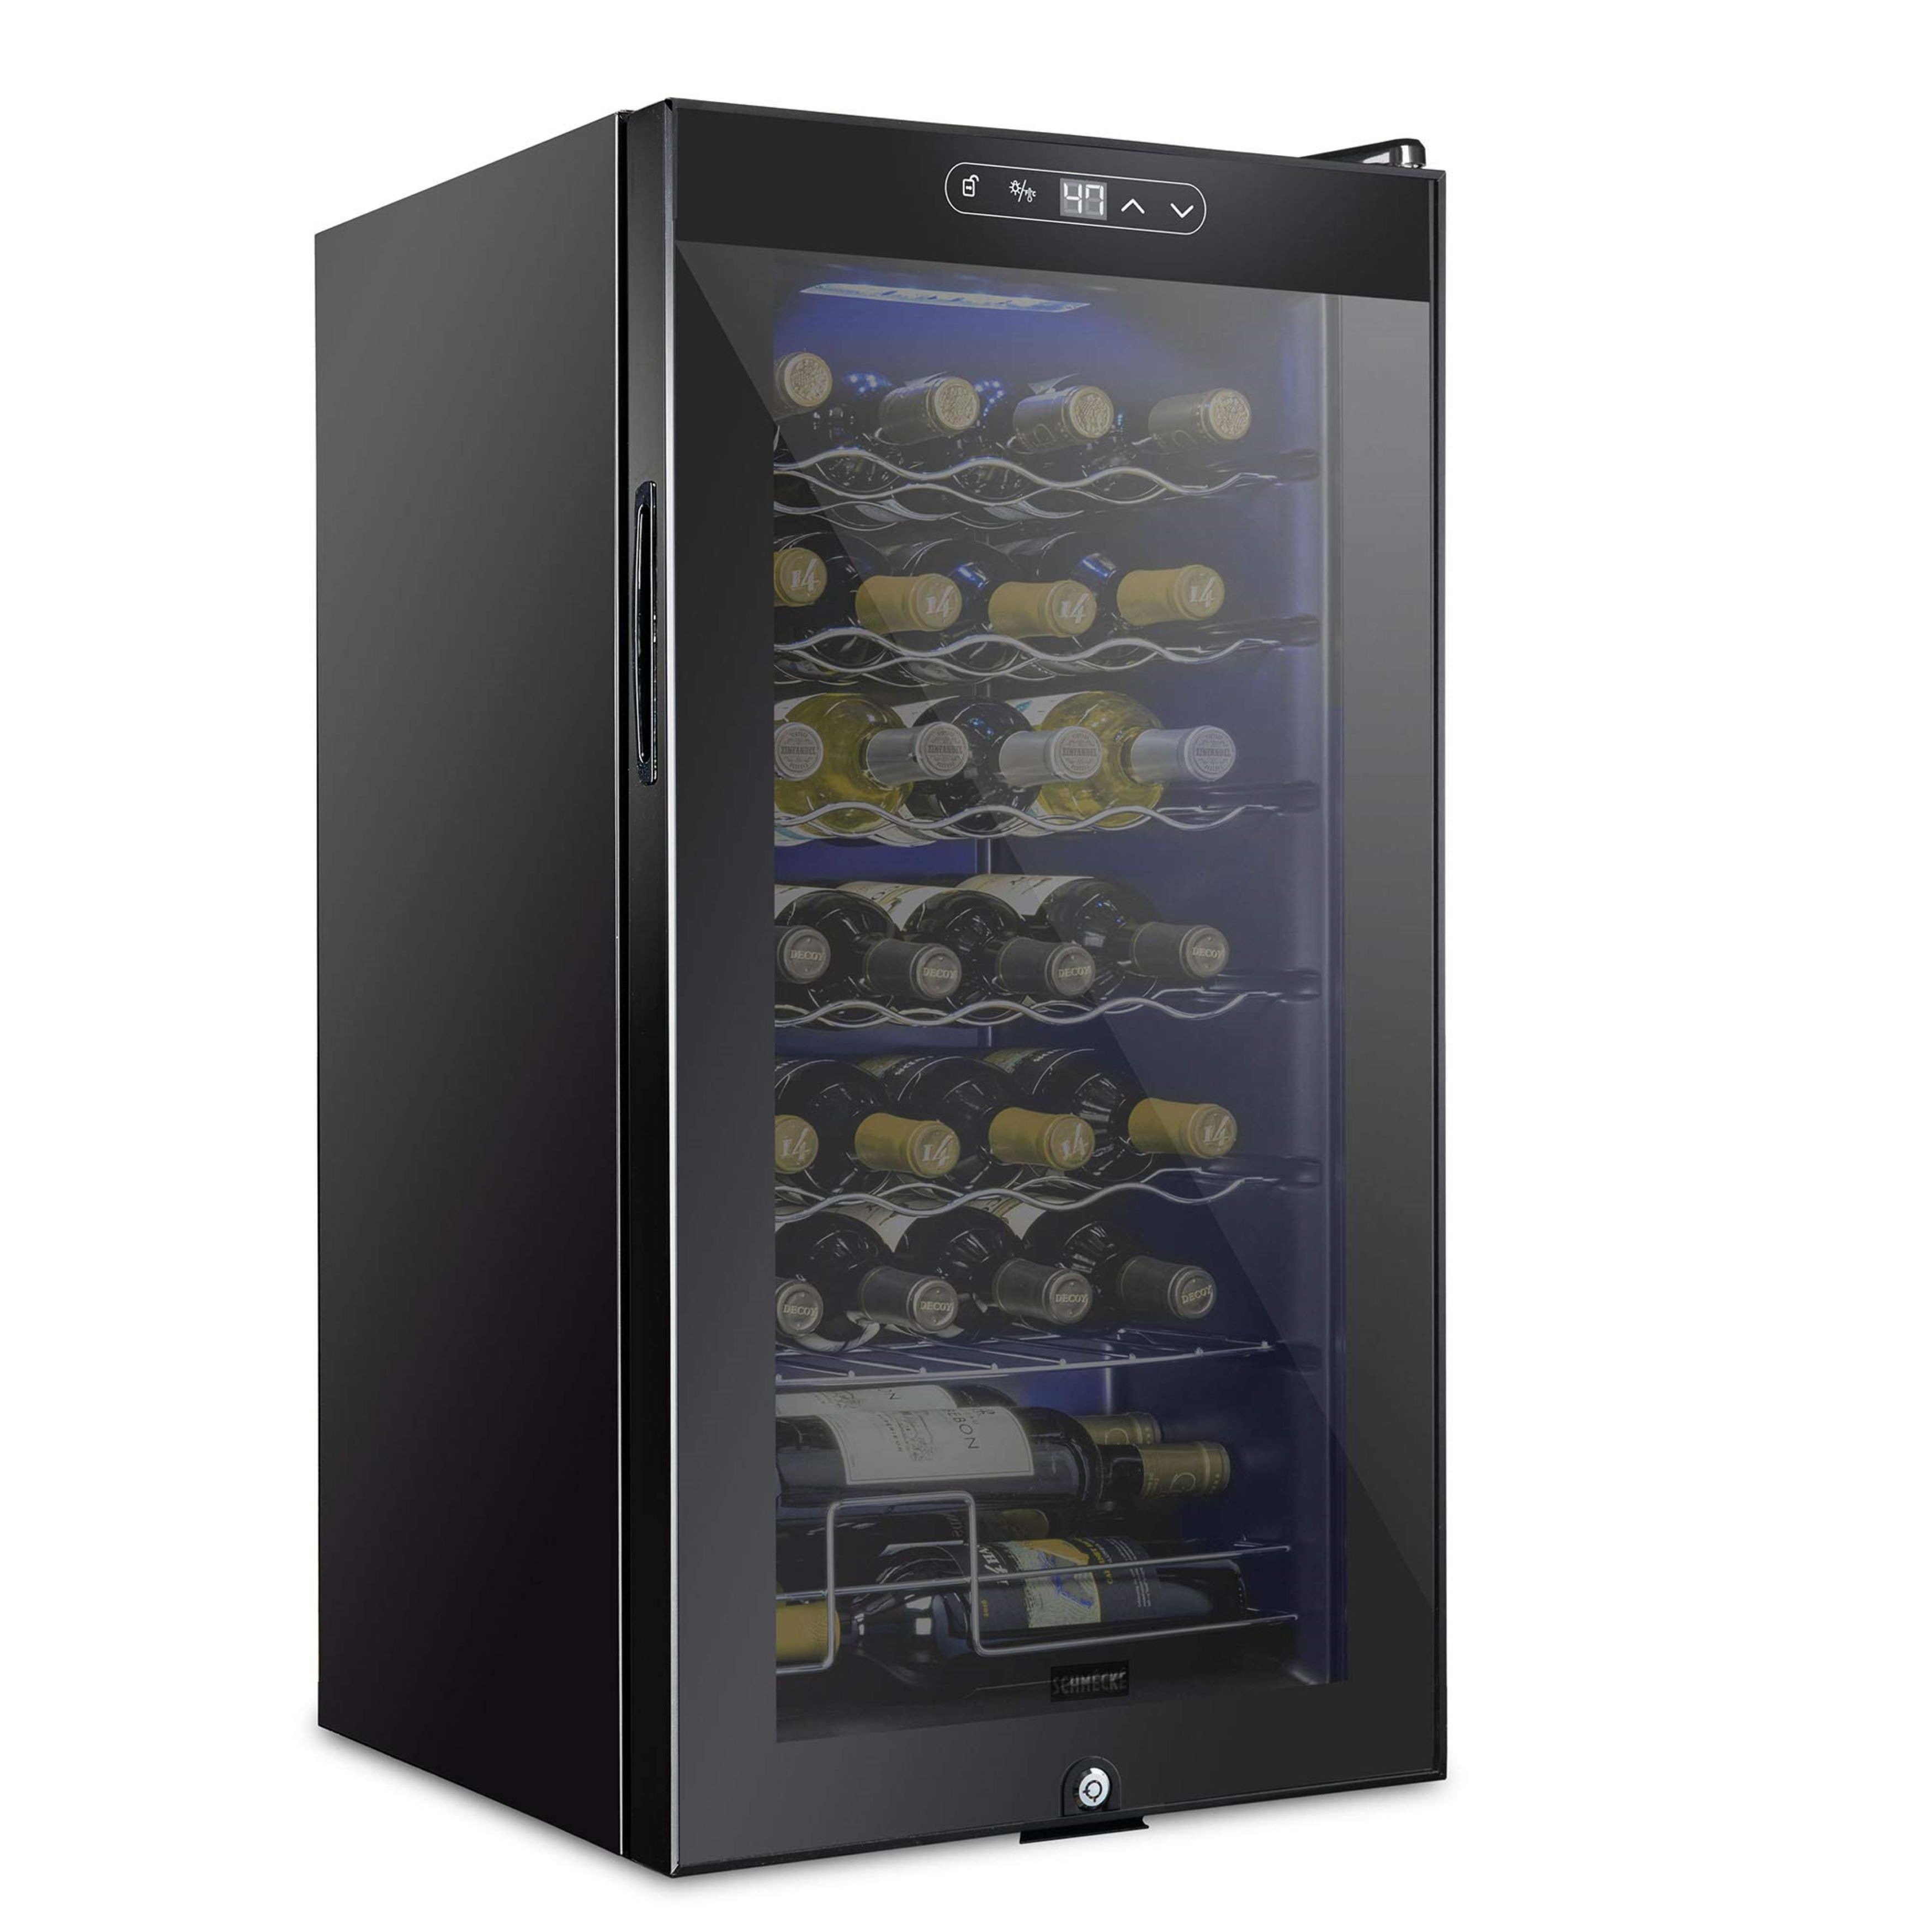 Schmecke Thermoelectric 10-Bottle Free Standing Wine Cooler - Stainless Steel